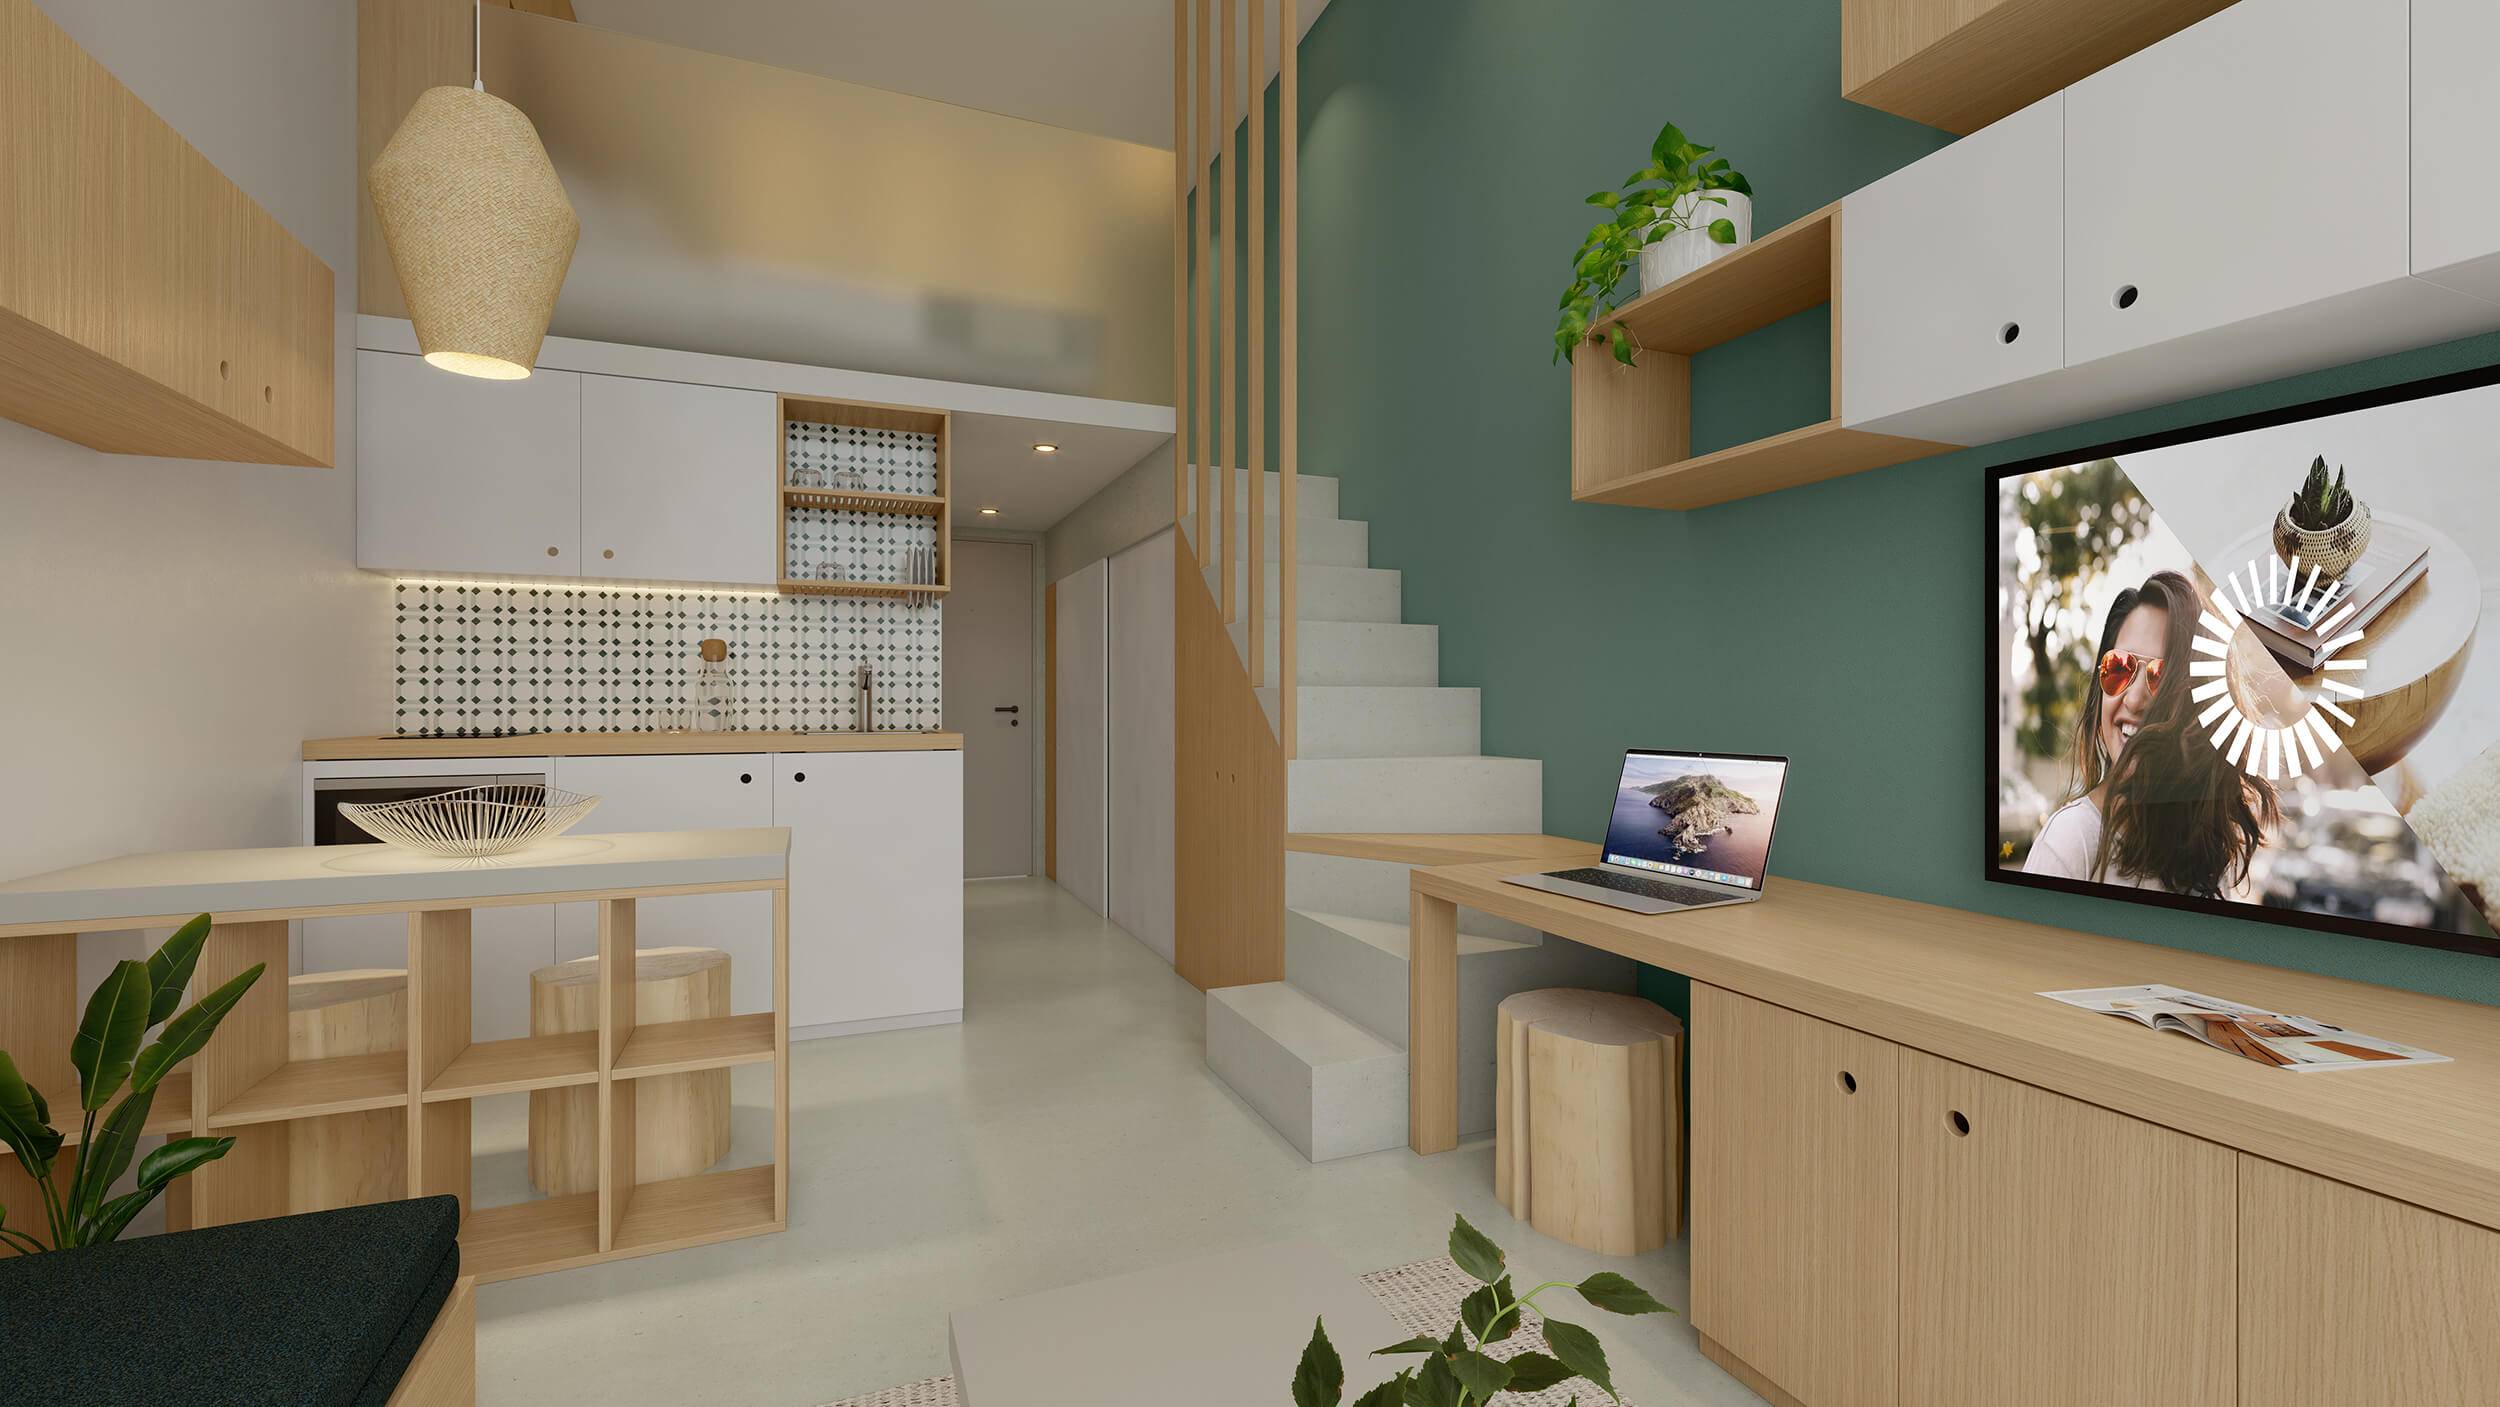 A light residential interior space, with a kitchen and dining table on the left, a long desk, shelving units and TV on the right. On the right is also a staircase leading up to a mezzanine room